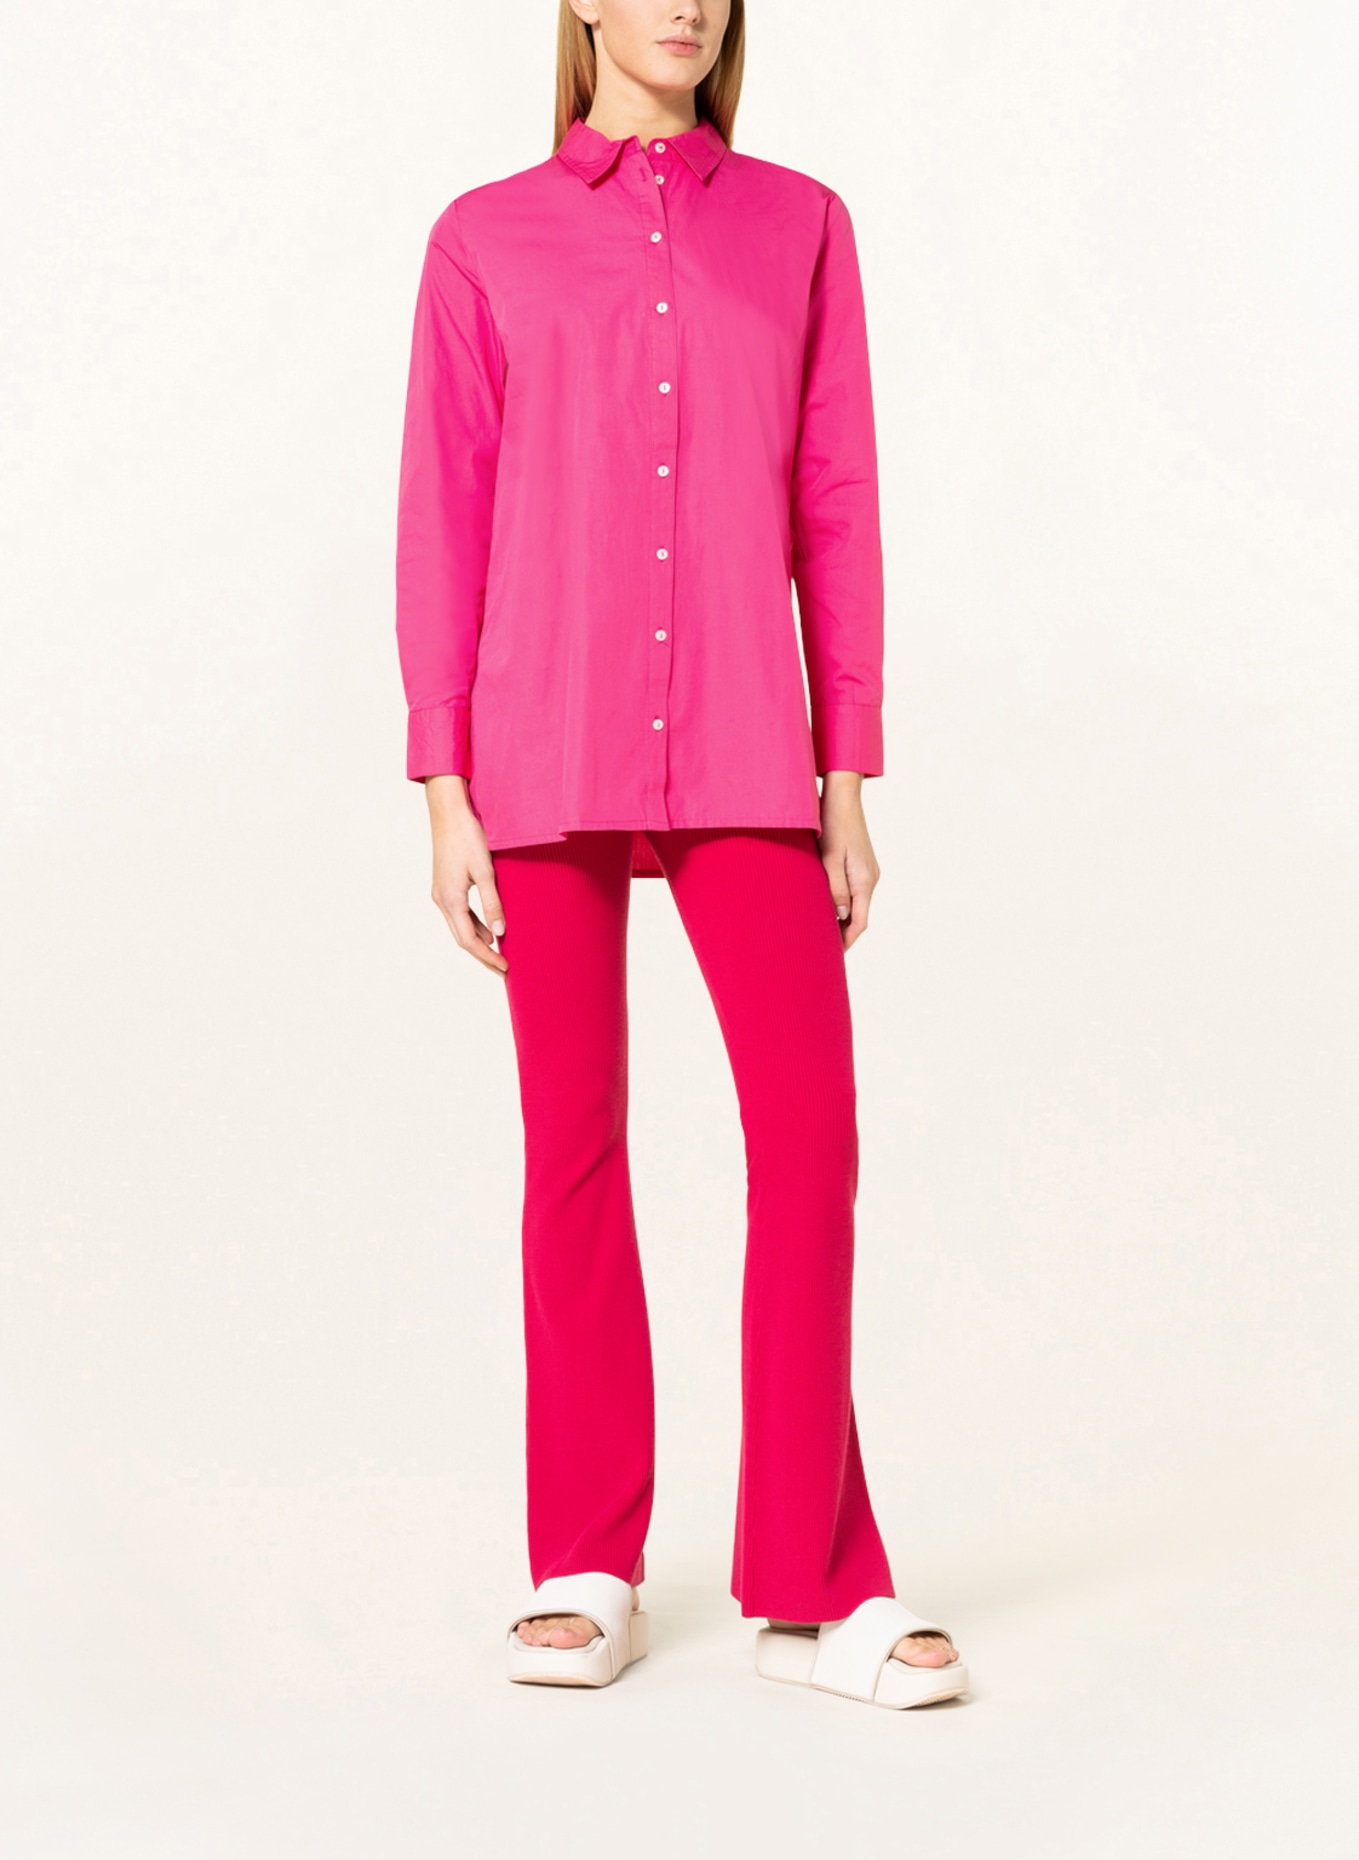 ONLY Shirt blouse, Color: PINK (Image 2)